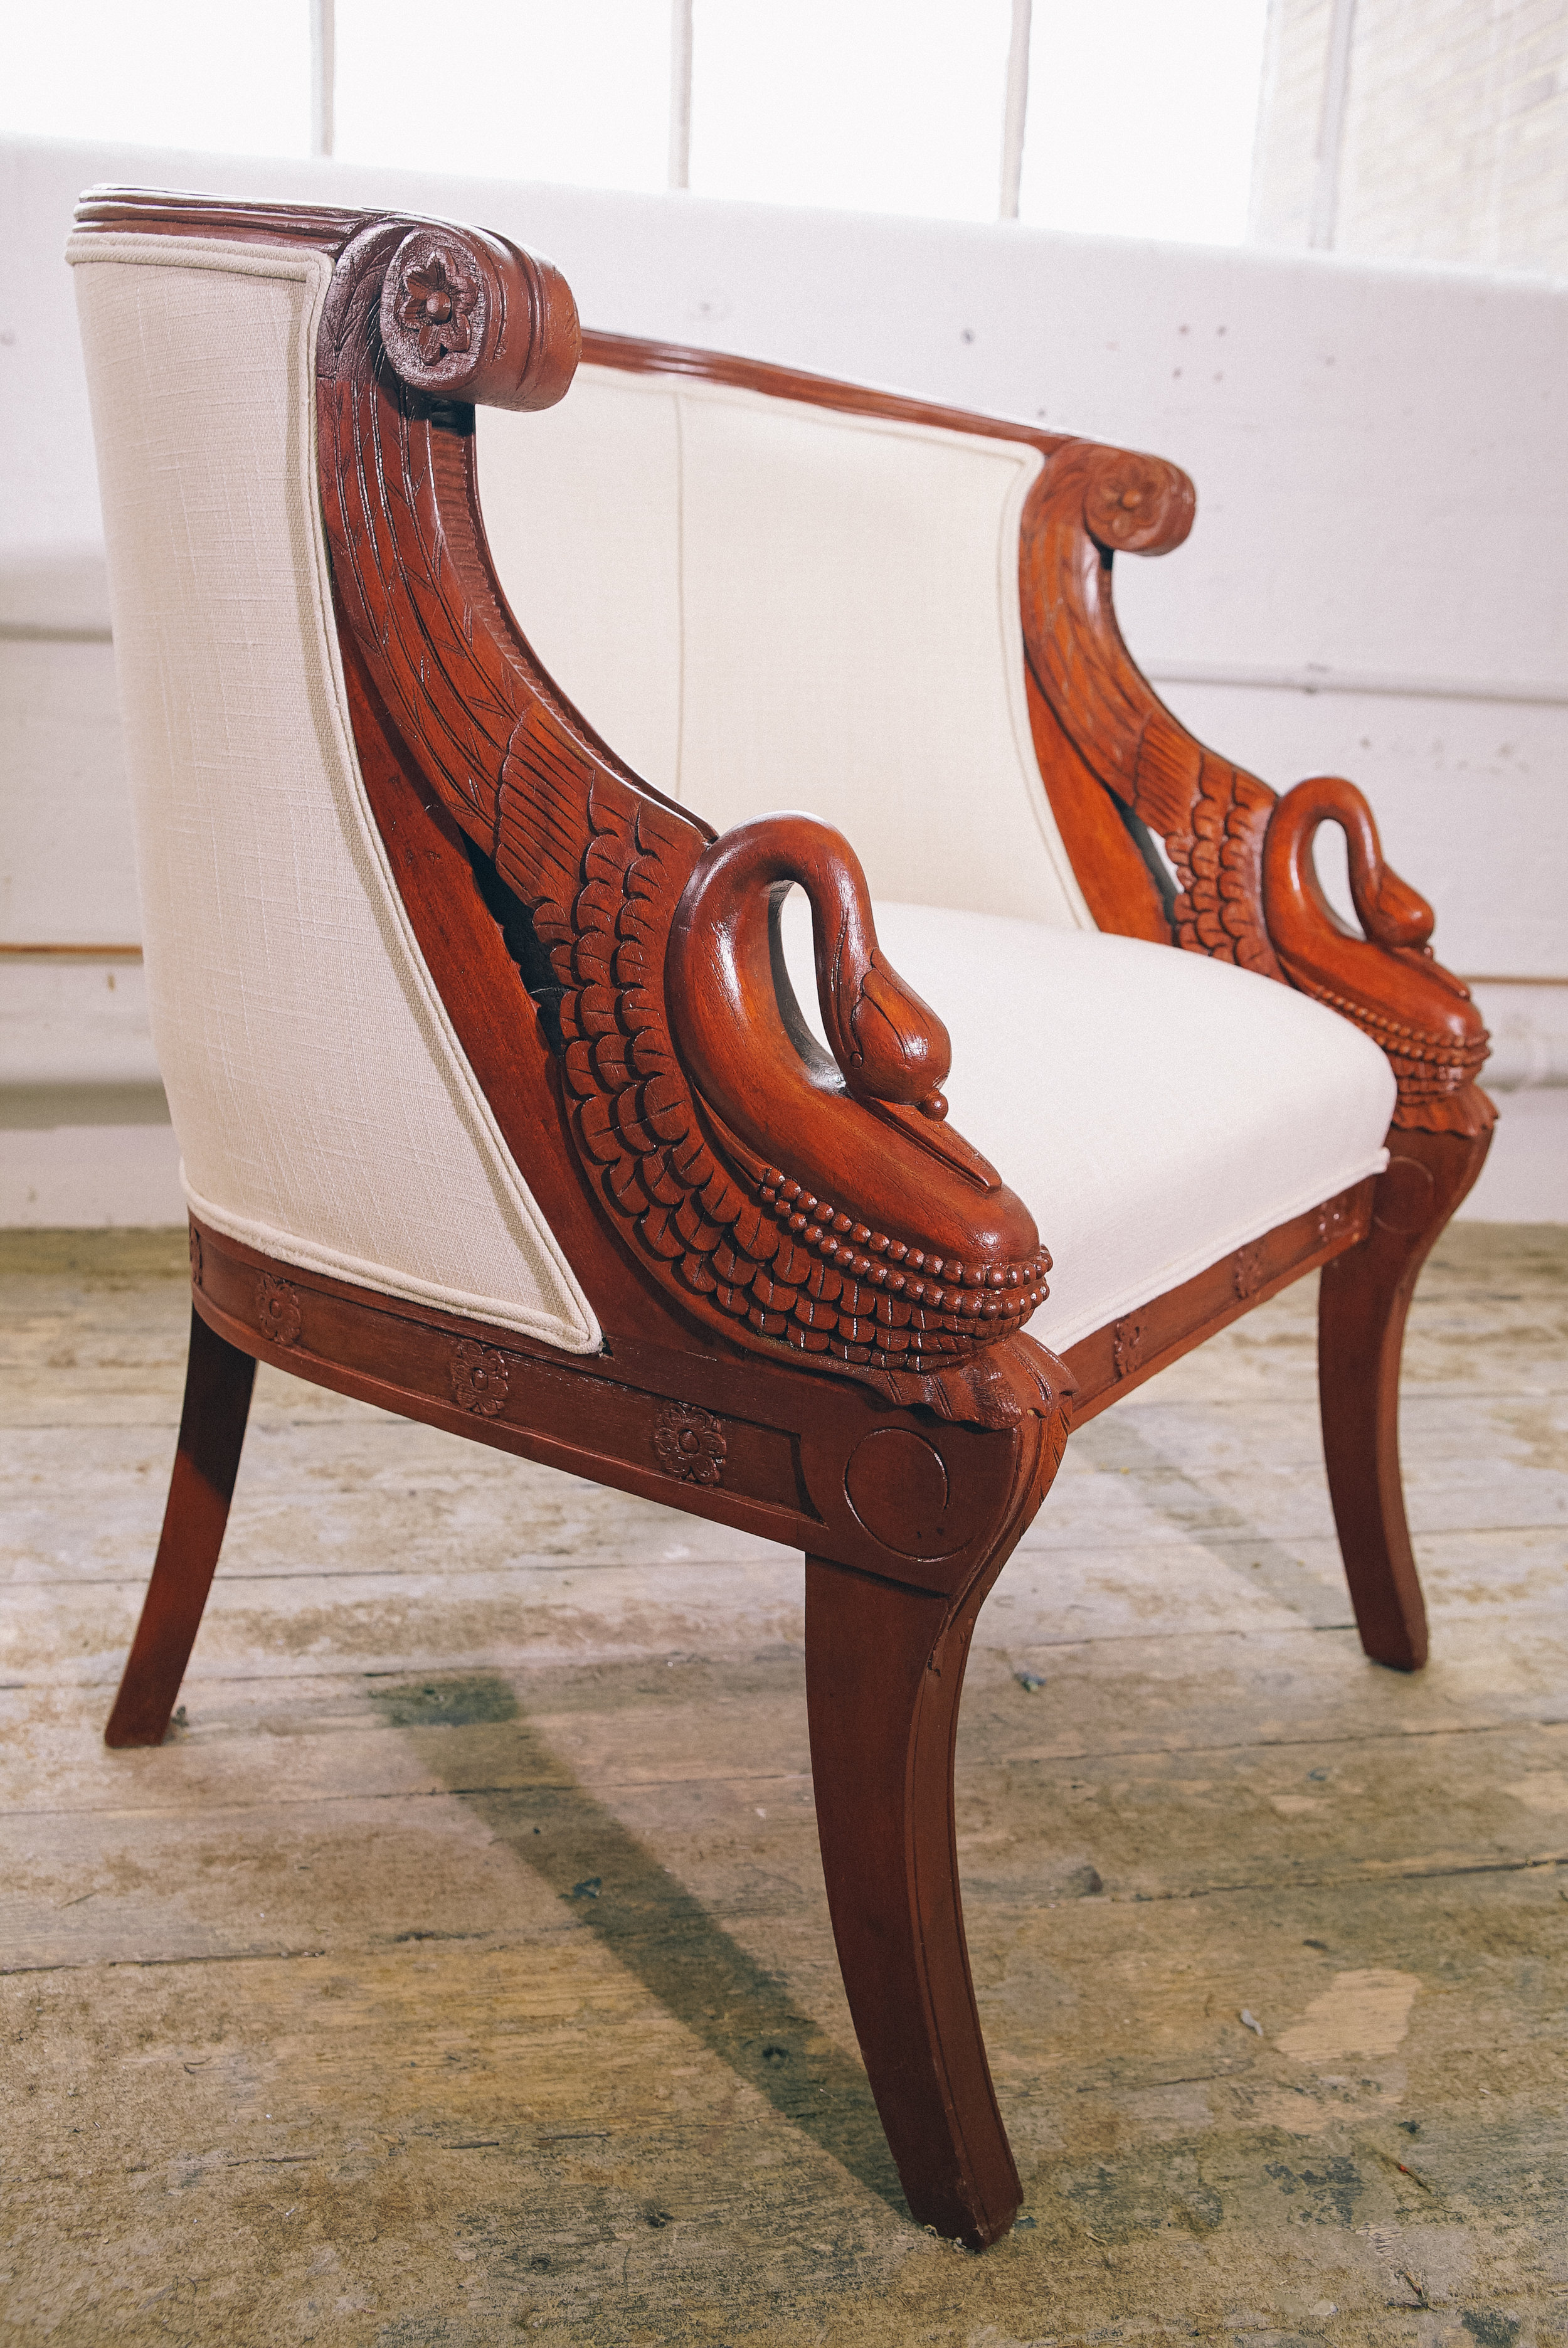 Antique Chair Upholstery After